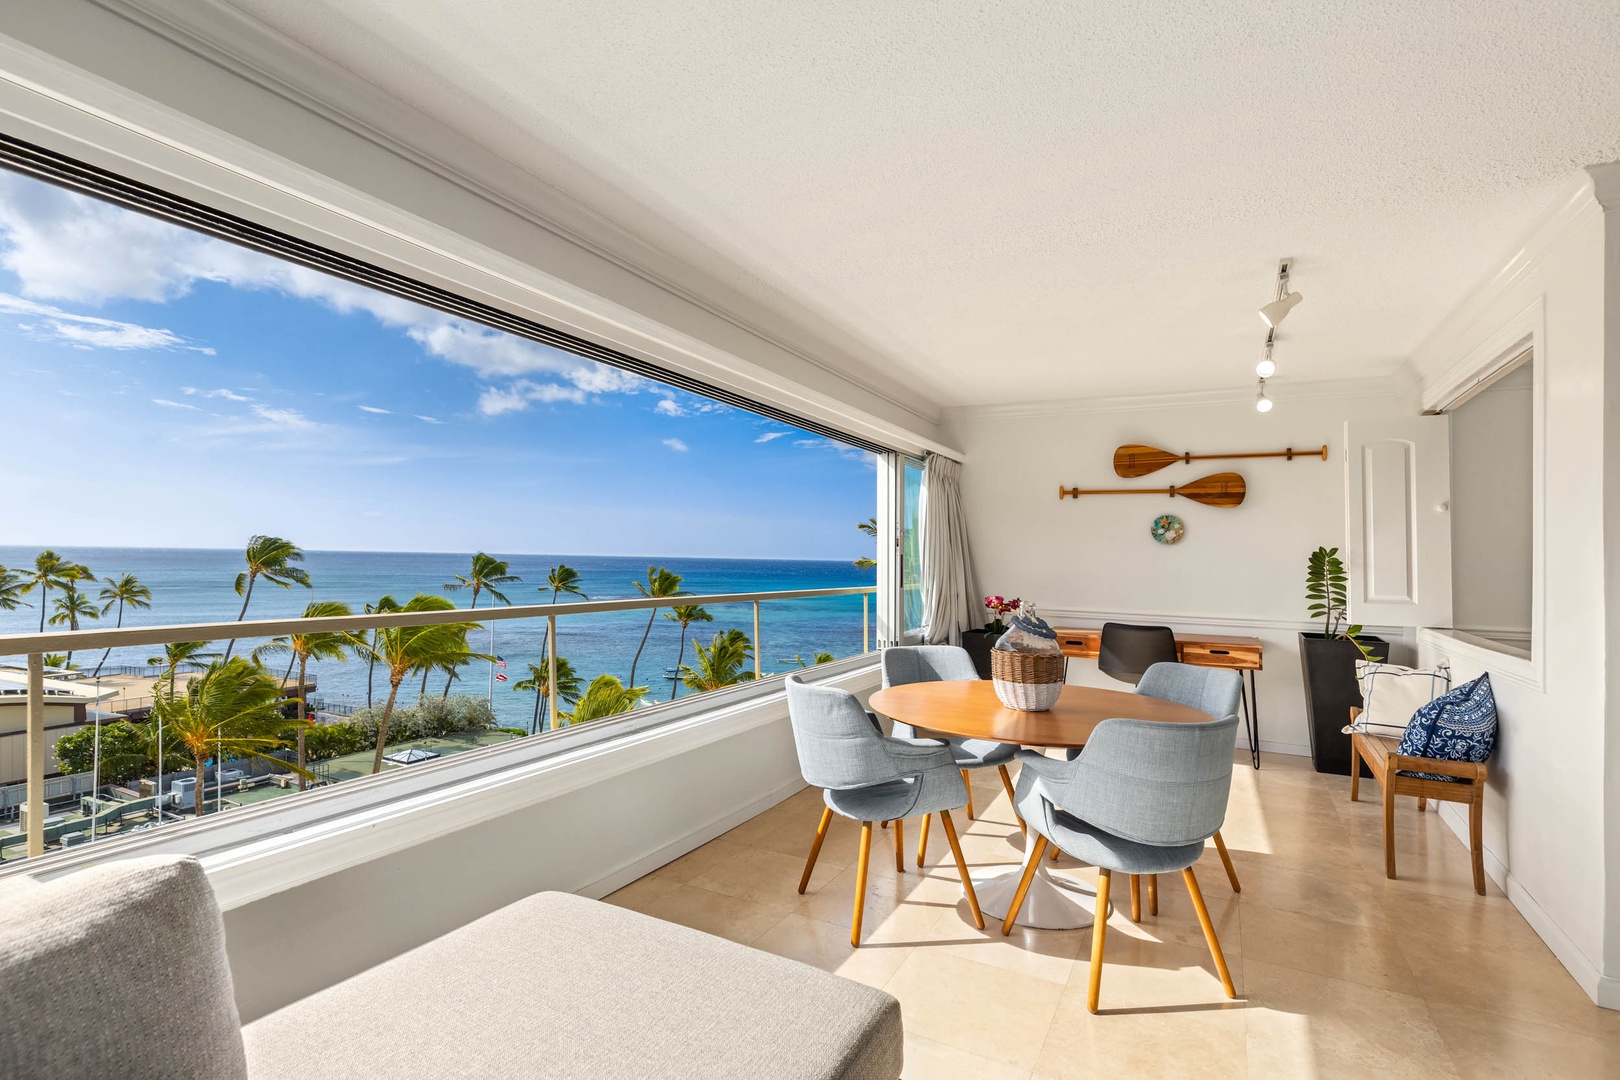 Honolulu Vacation Rentals, Colony Surf Getaway - Inviting dining space with ocean views for memorable meals and relaxation.